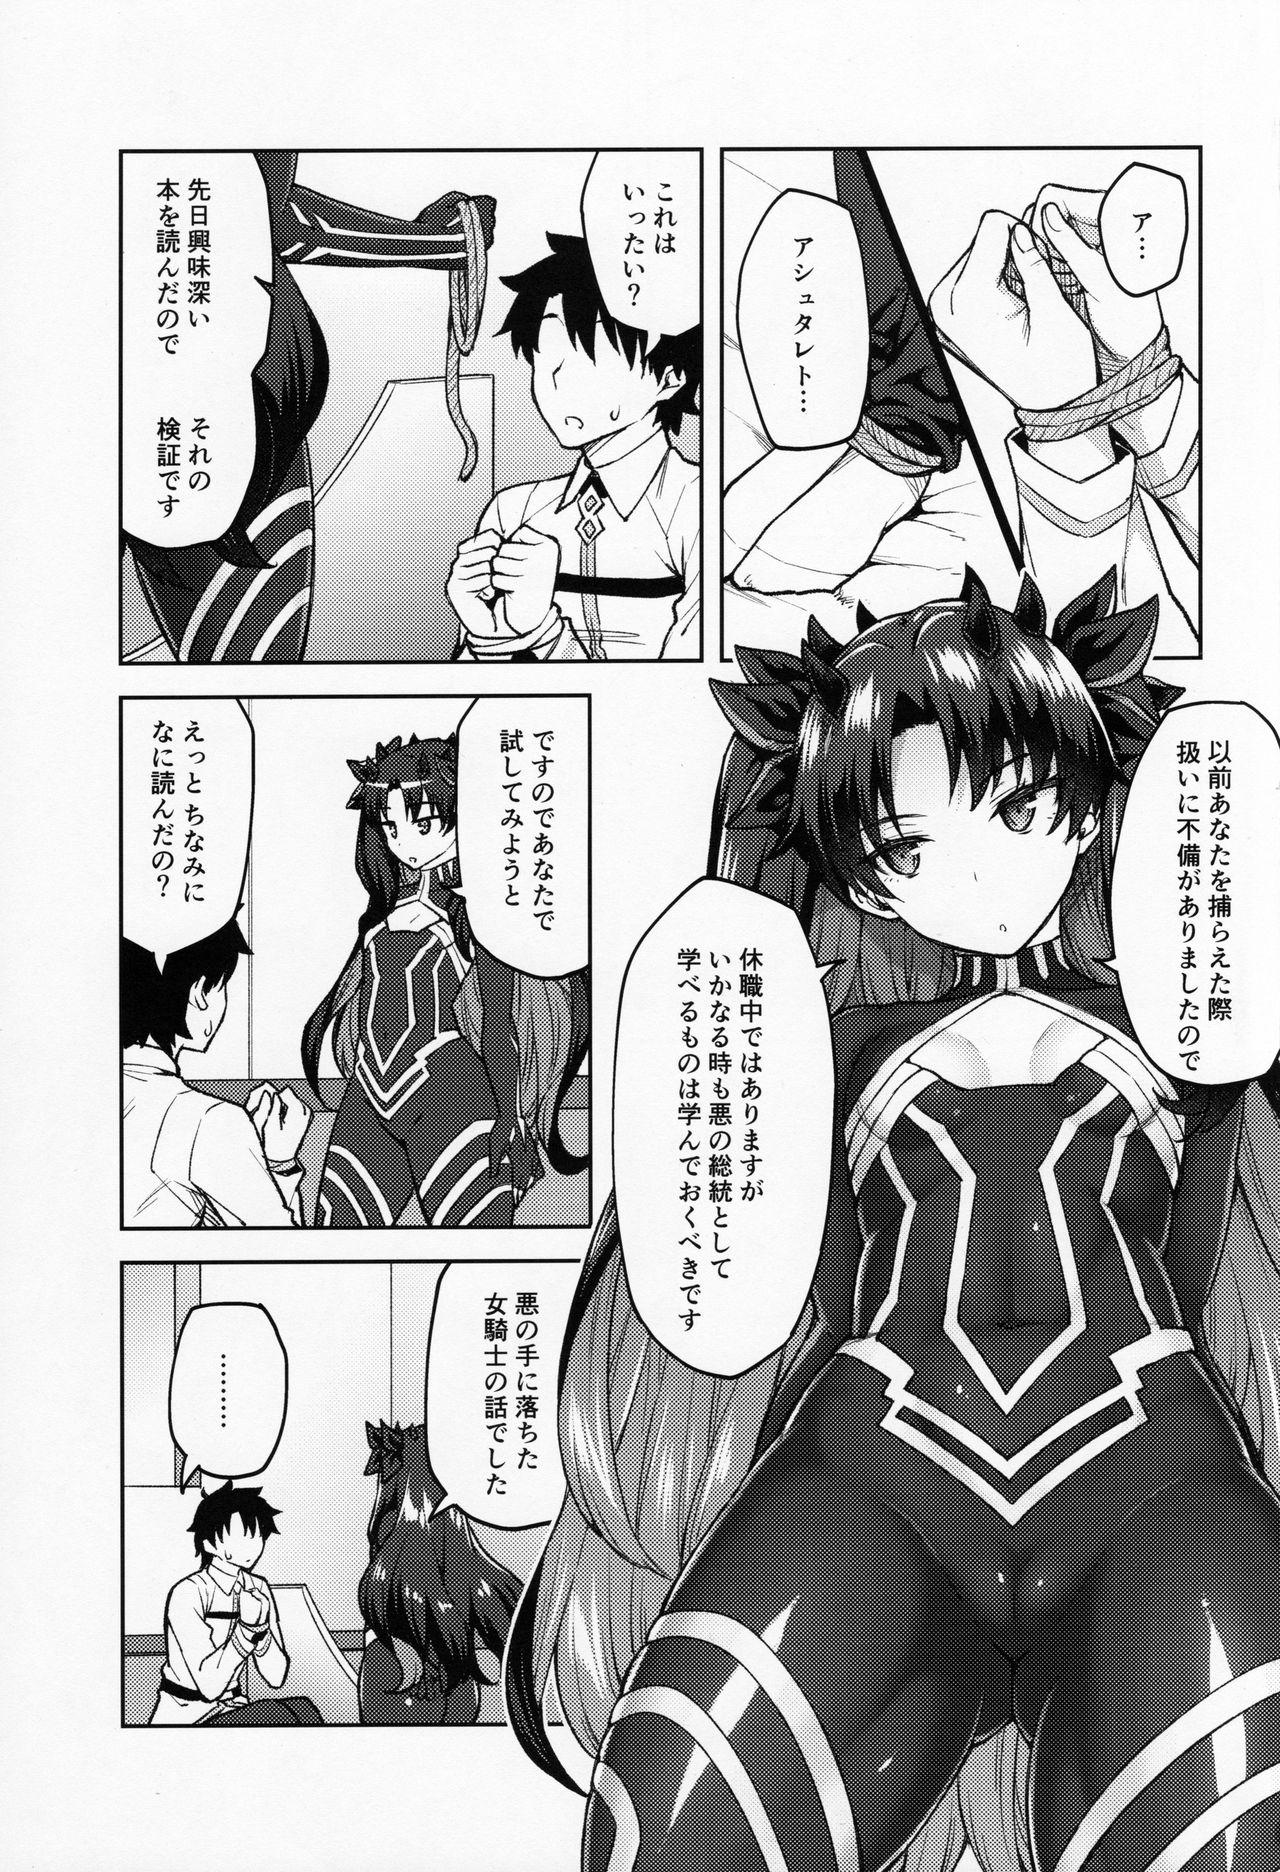 Groupsex Chaldea Life V - Fate grand order Licking Pussy - Page 2